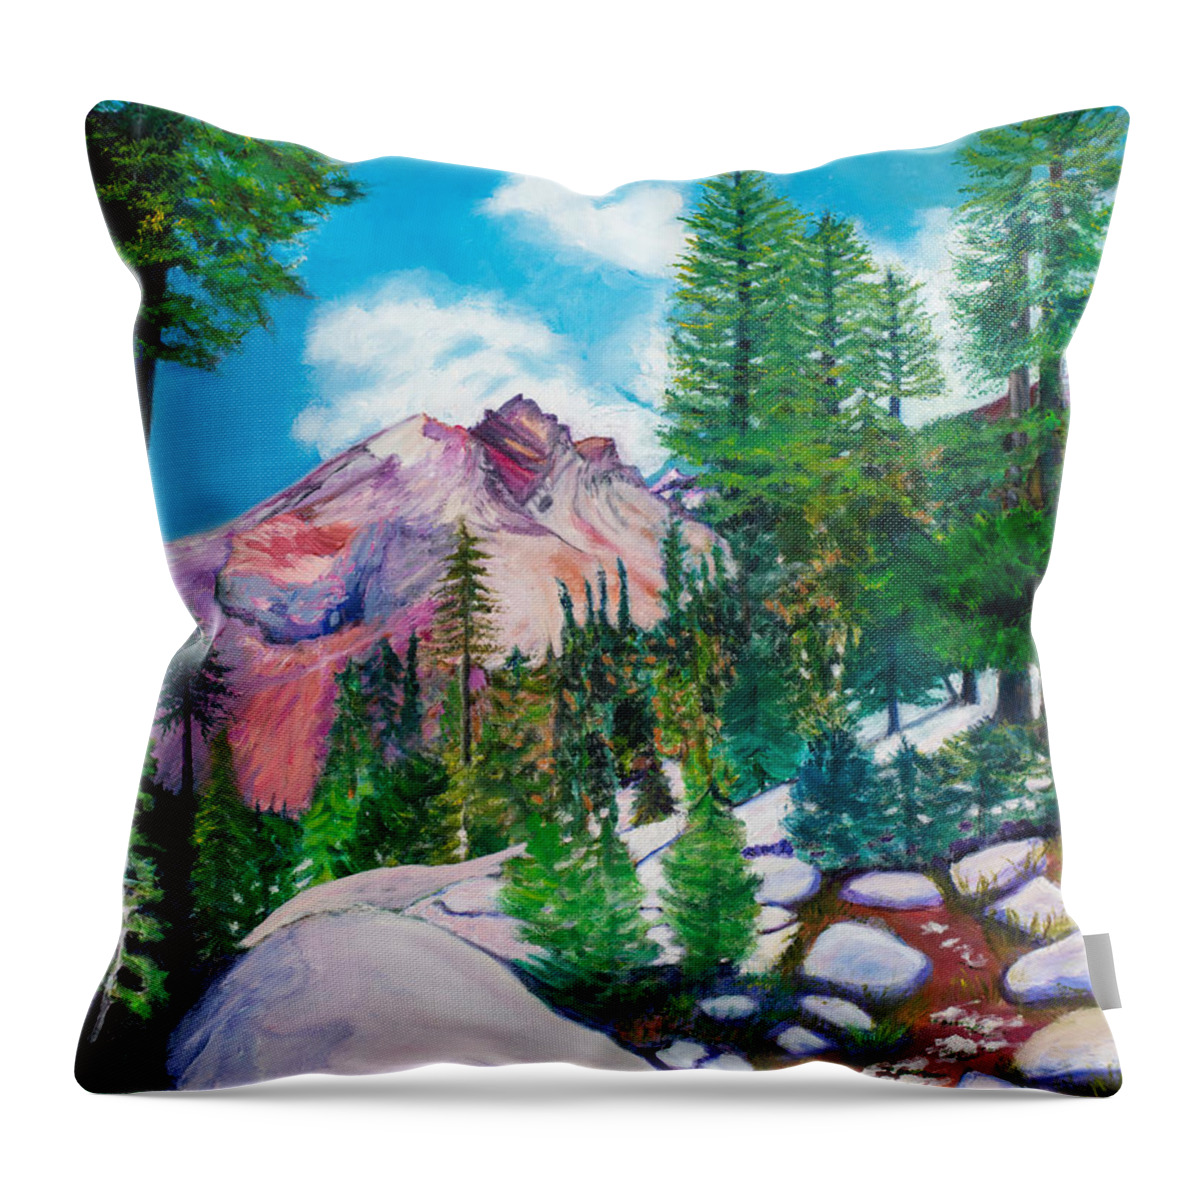 Mountain Throw Pillow featuring the painting Shasta Path by Santana Star